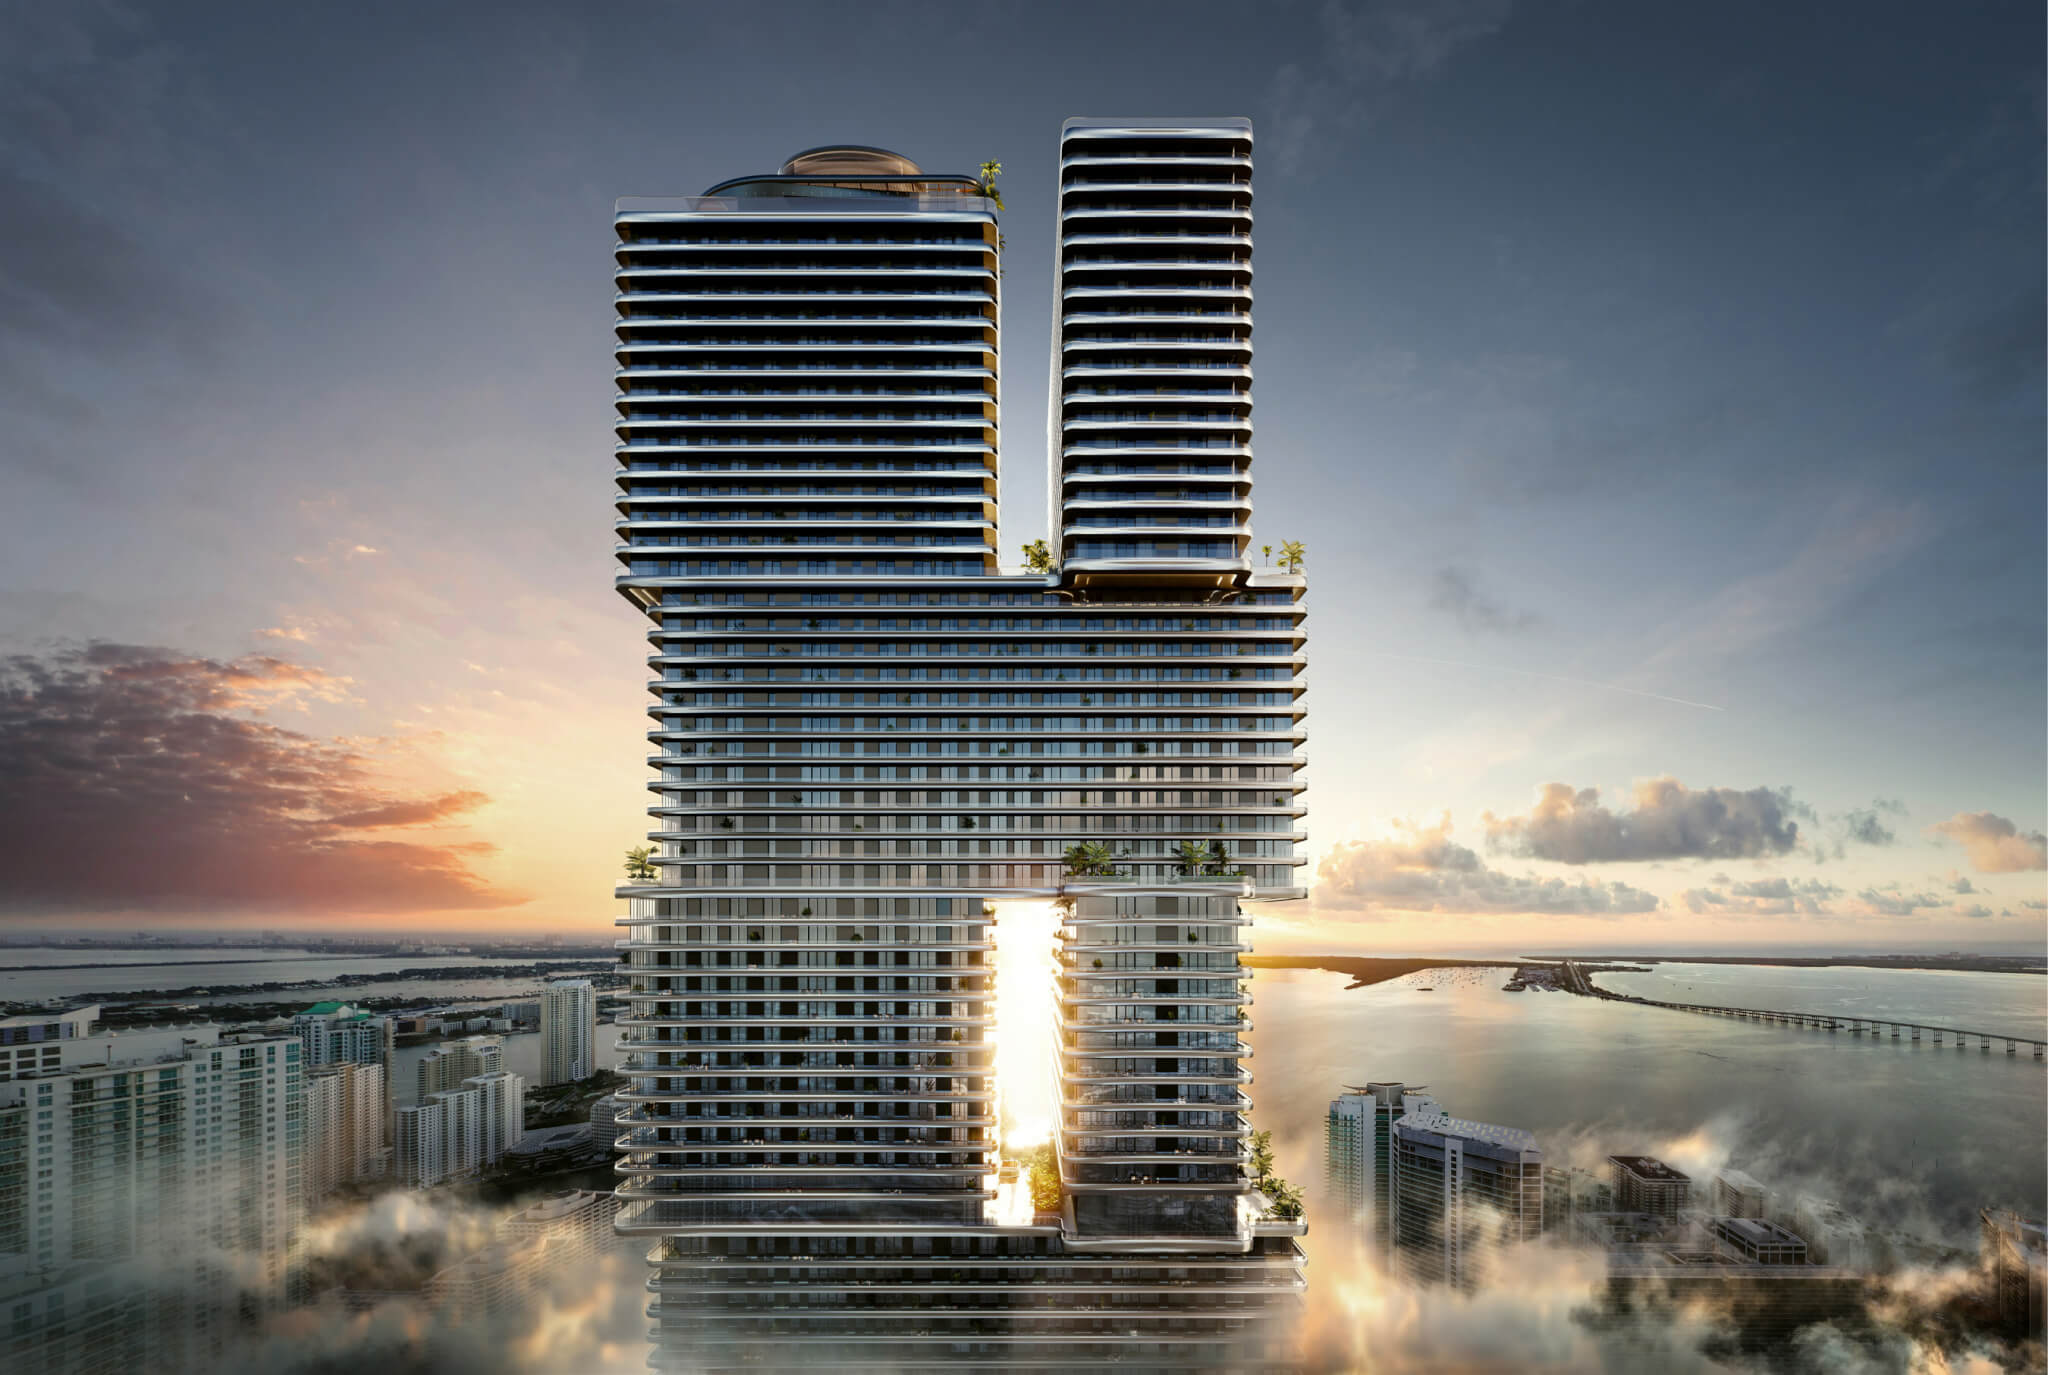 Mercedes-Benz Places designed by SHoP Architects will bring a new luxury car–branded residential project to Miami